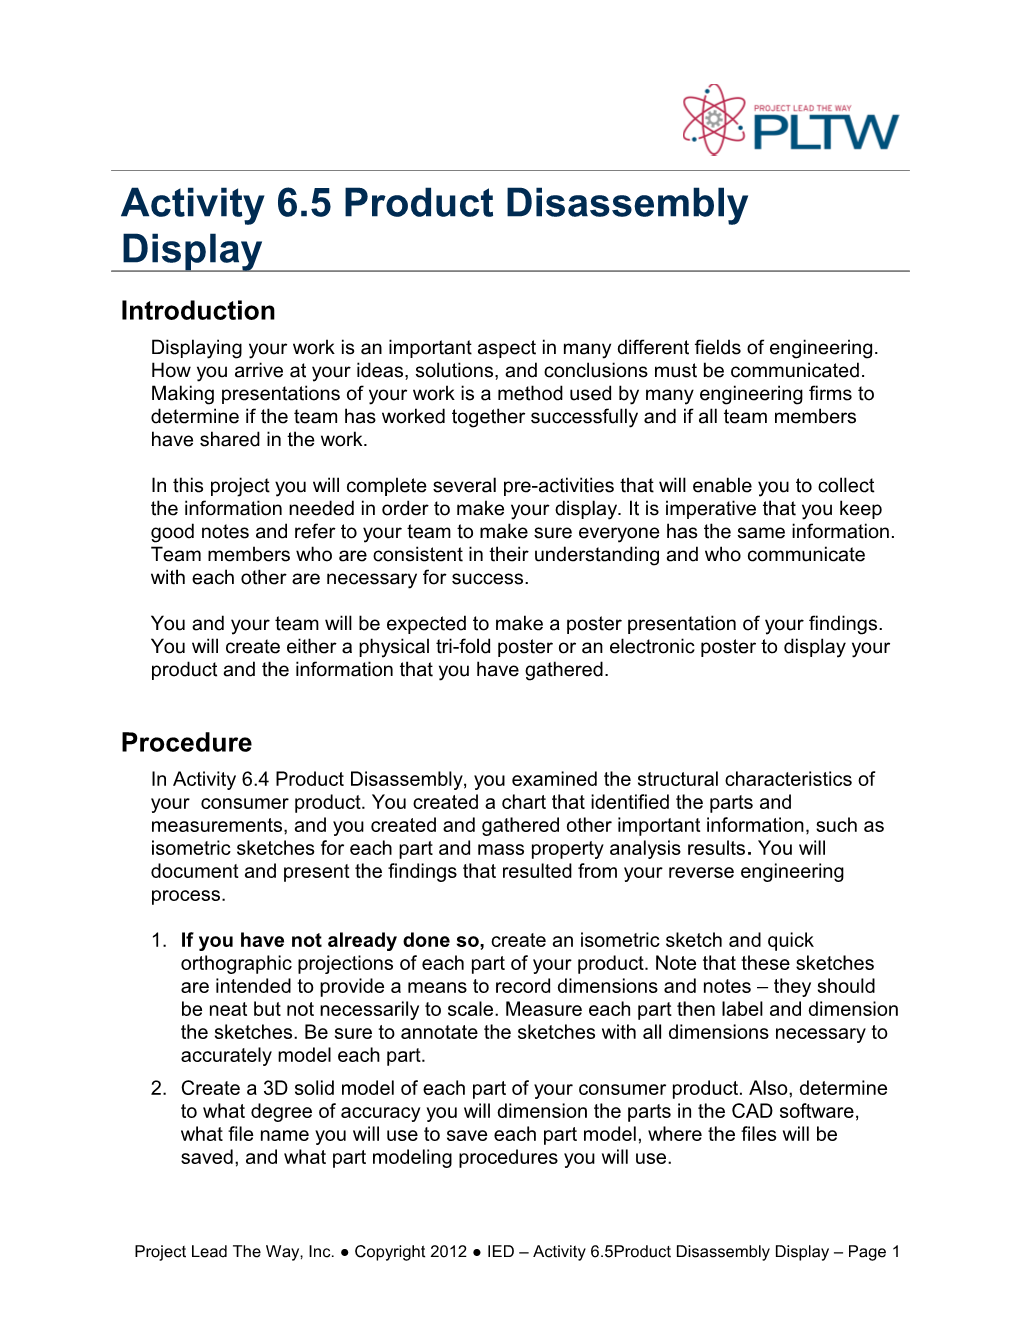 Activity 6.5Product Disassembly Display